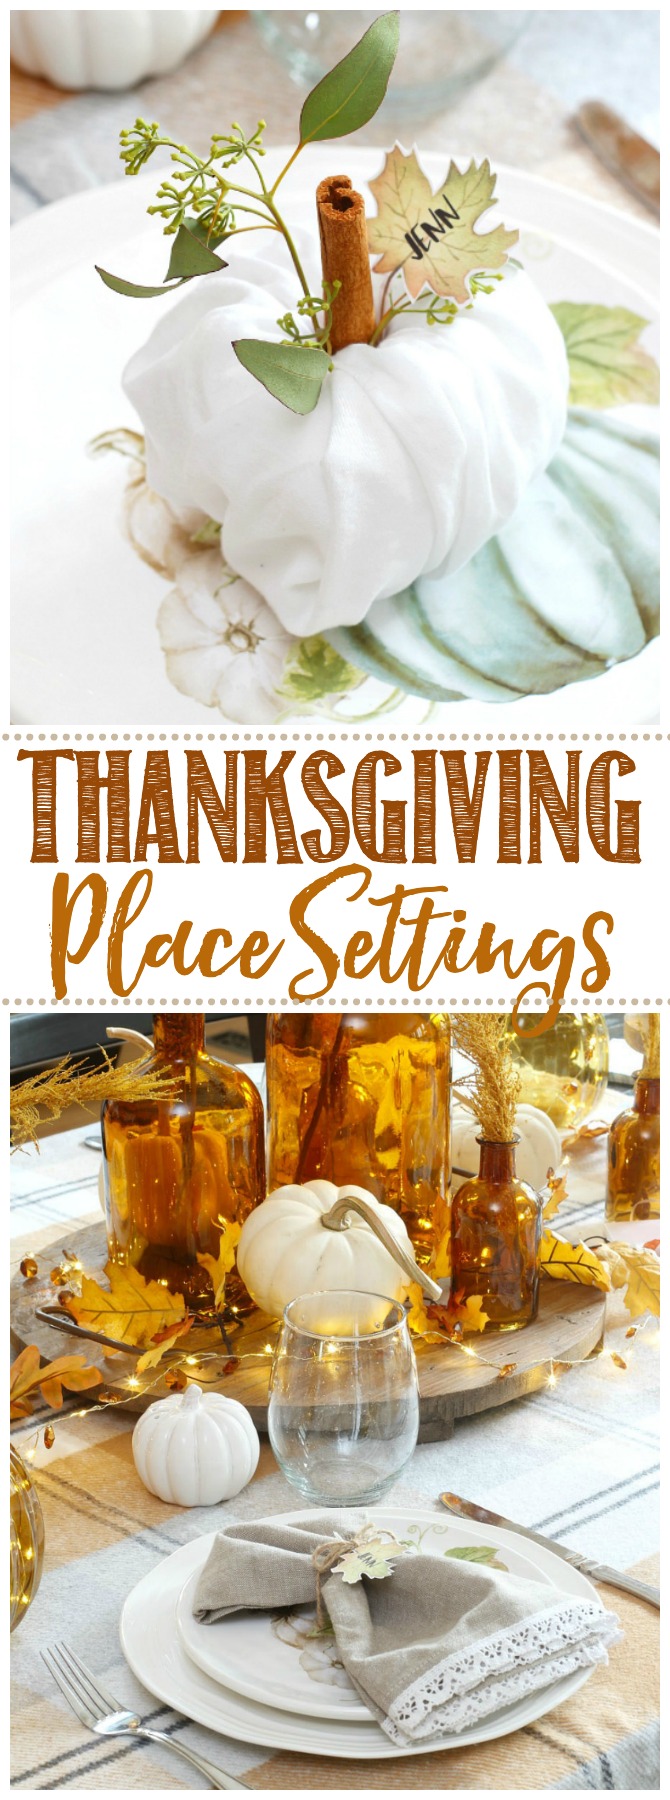 Thanksgiving place settings using a pumpkin napkin fold and free printable leaf name tags.